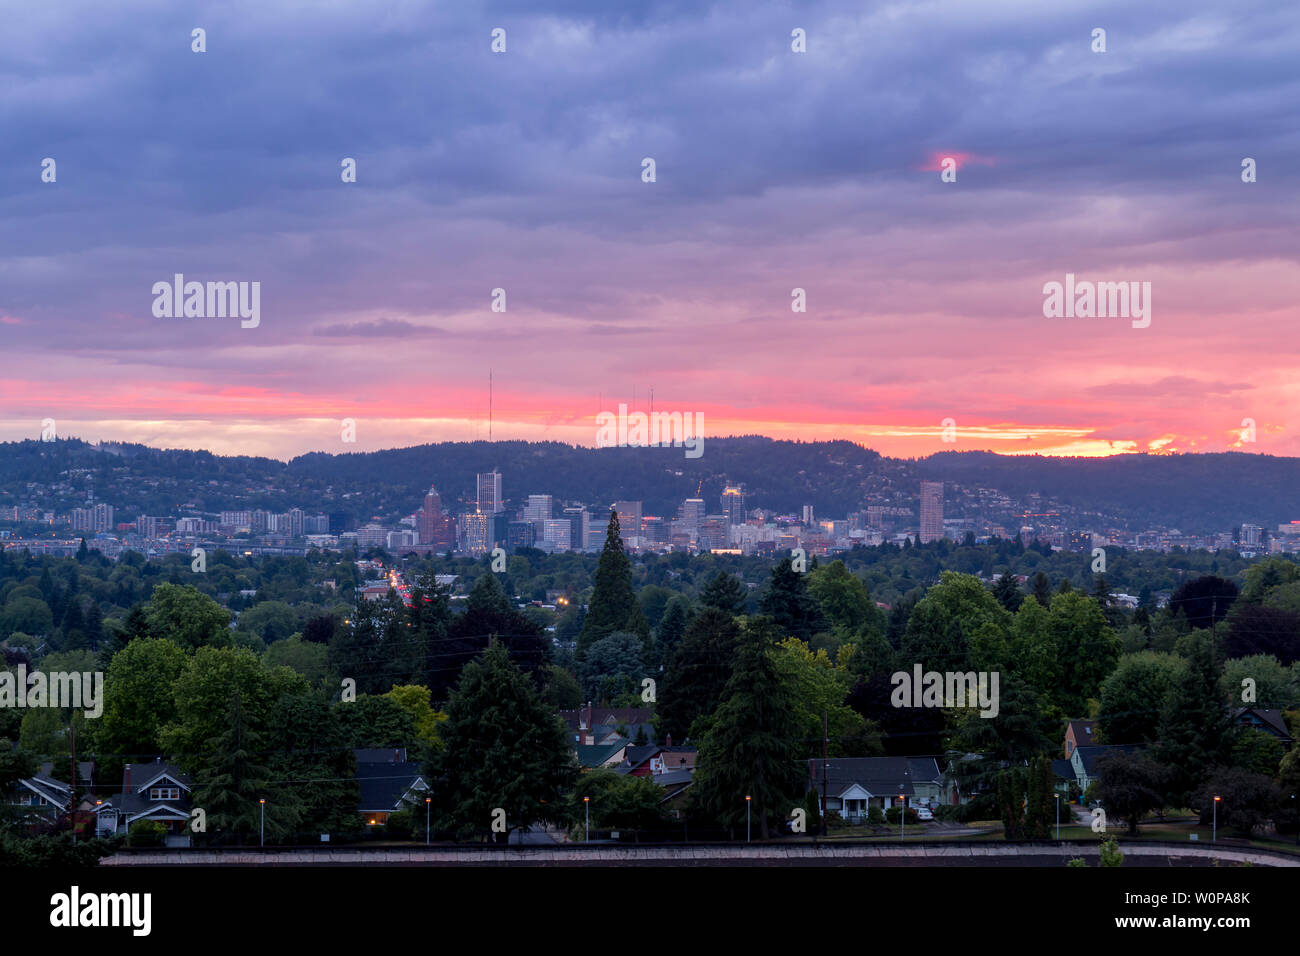 Colorful sunset over Portland, Oregon after a thunderstorm in the Pacific Northwest. Stock Photo